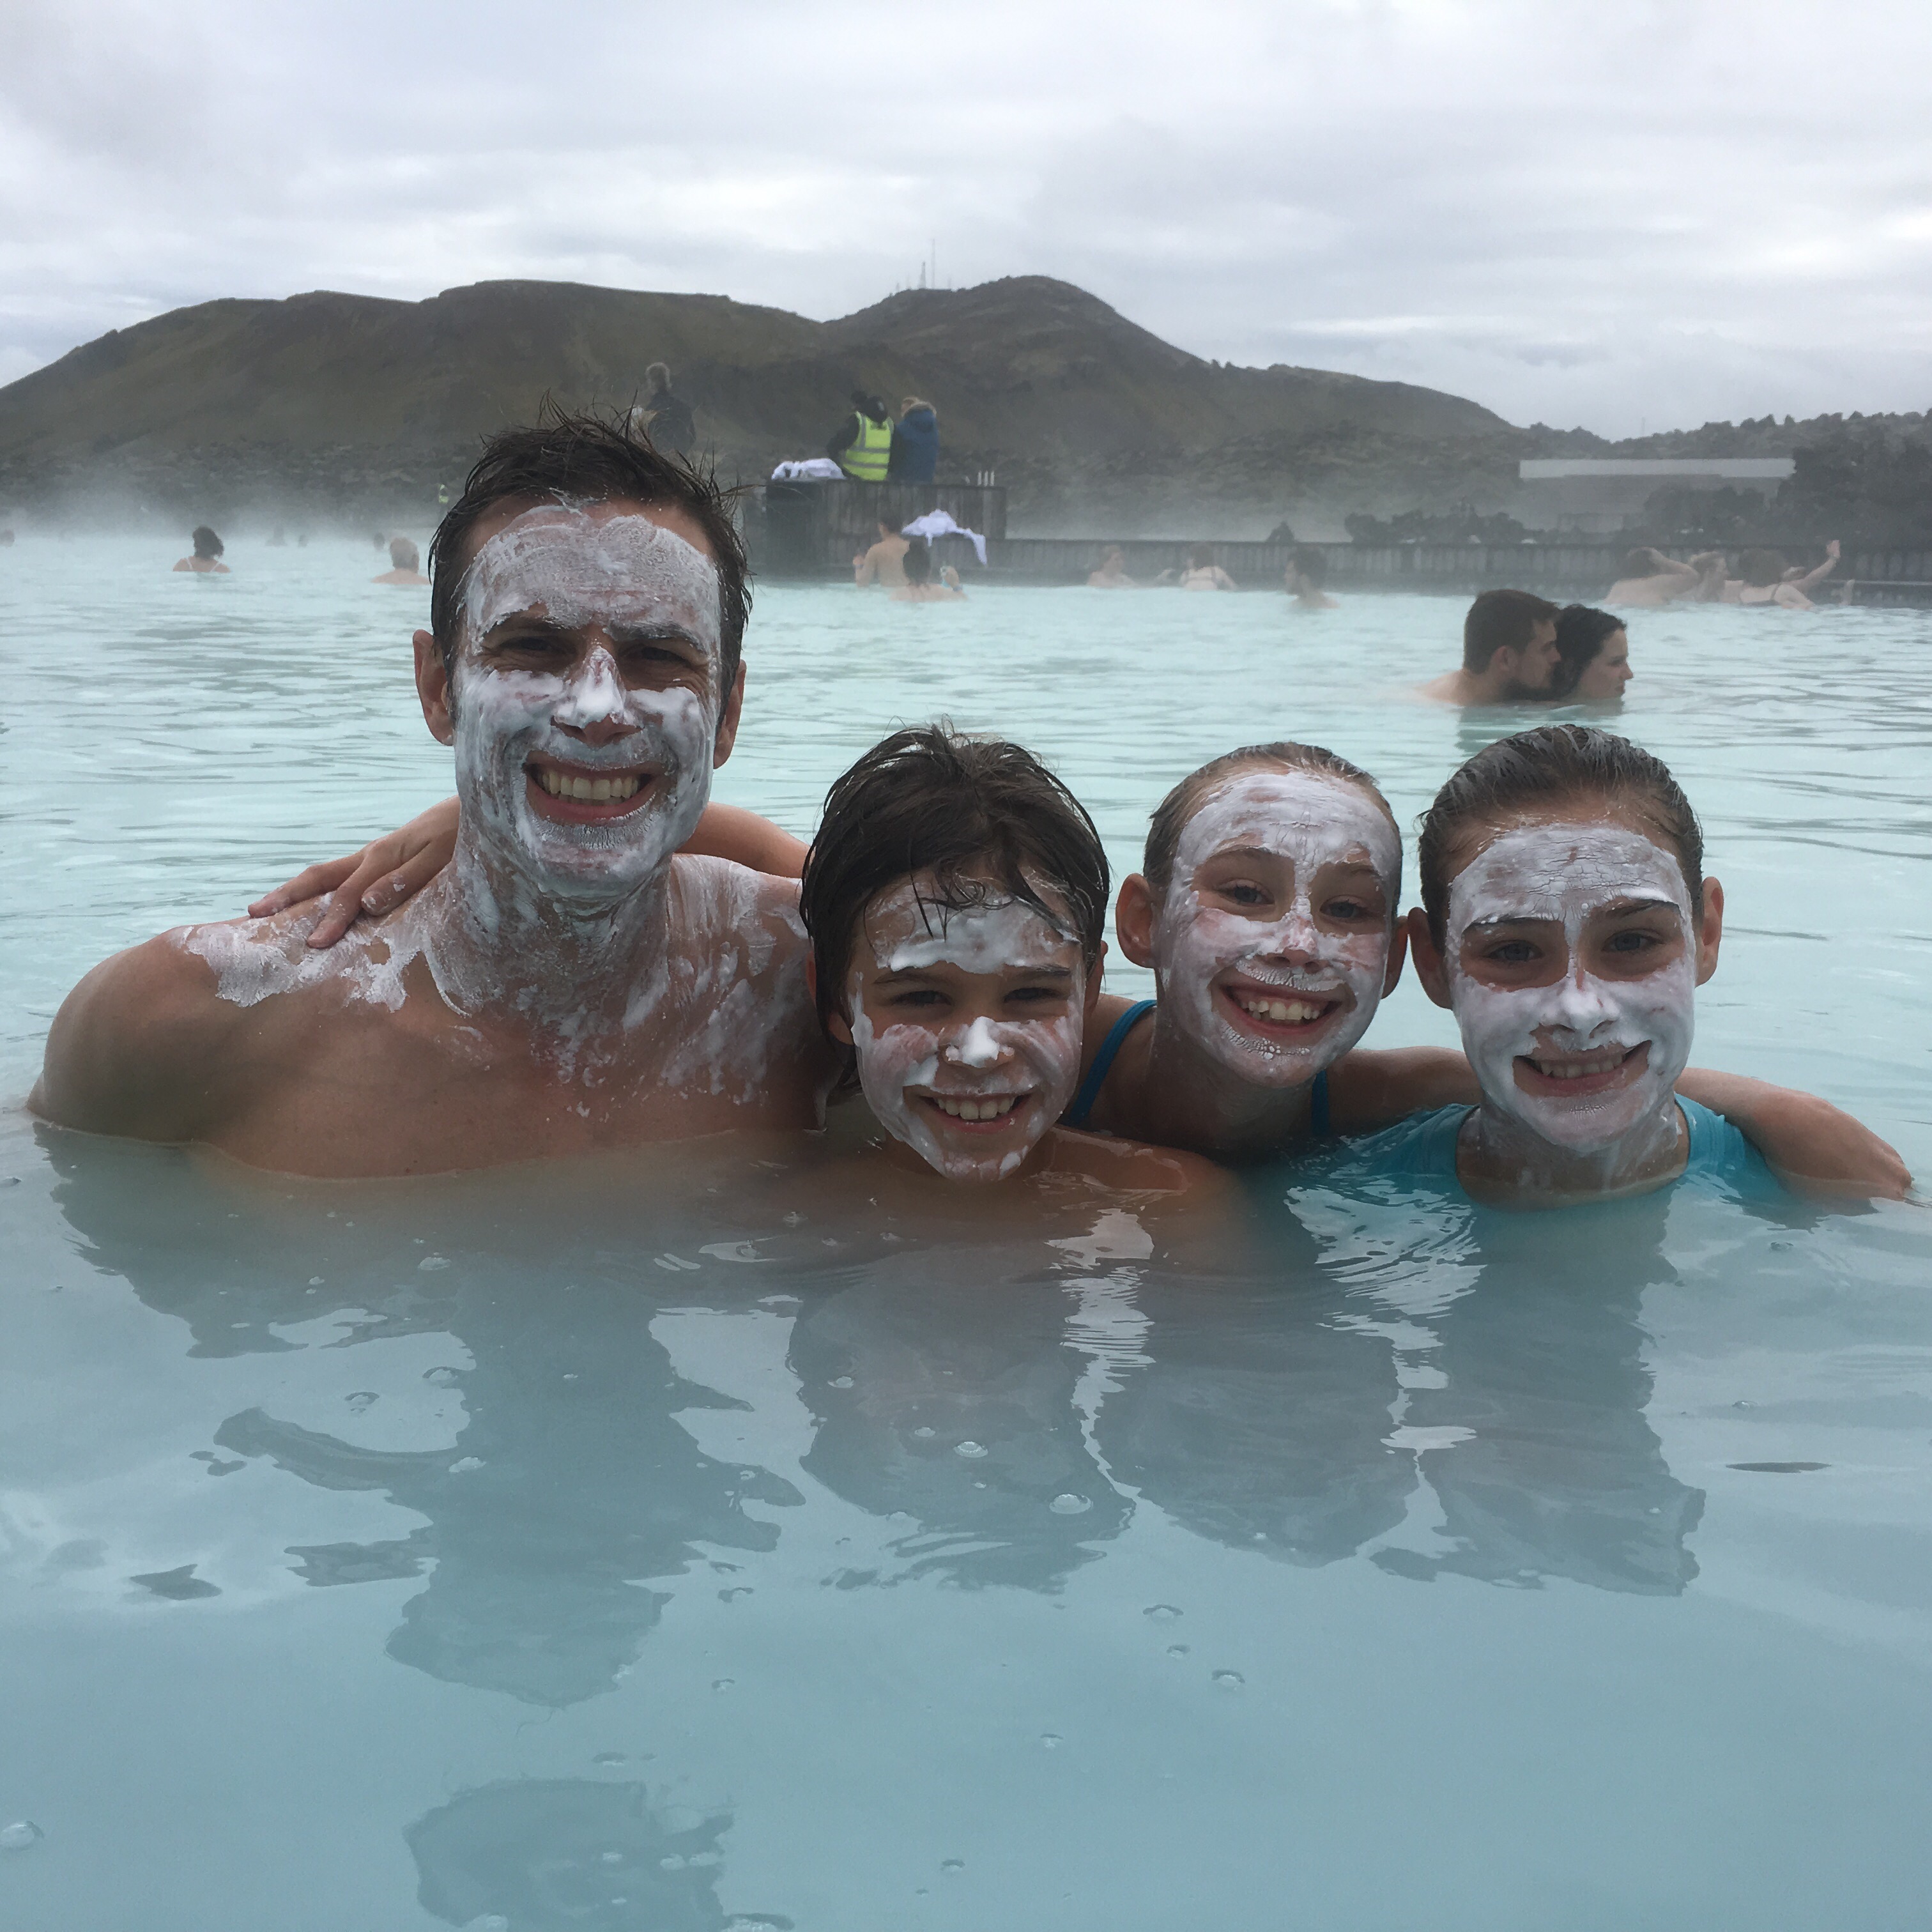 Top 5 Family Vacation Tips for Iceland